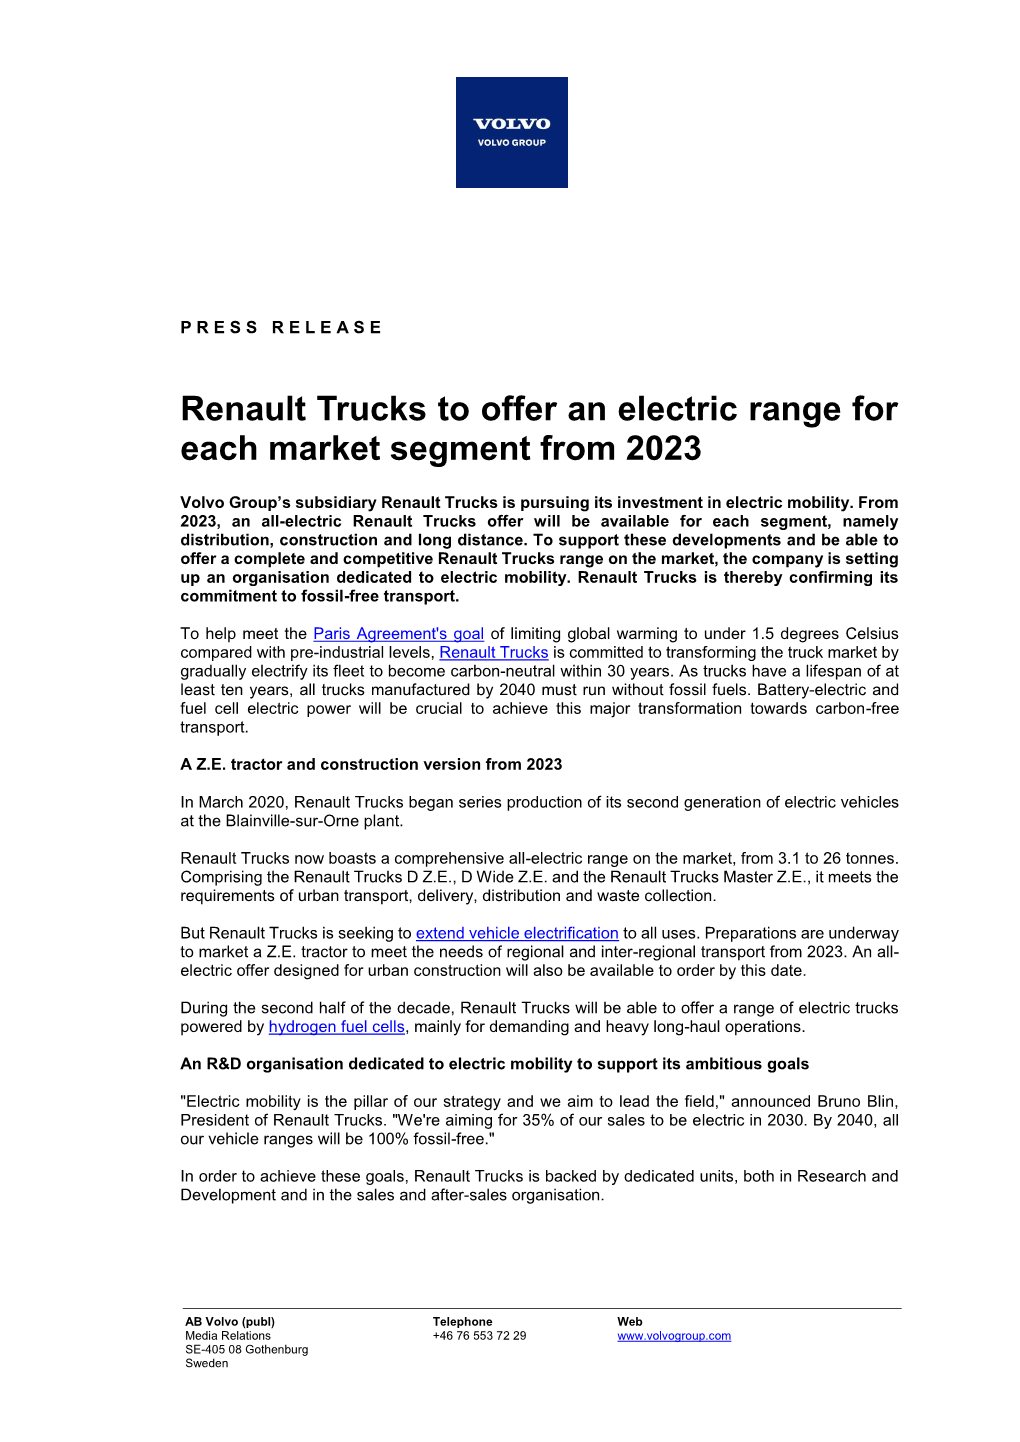 Renault Trucks to Offer an Electric Range for Each Market Segment from 2023